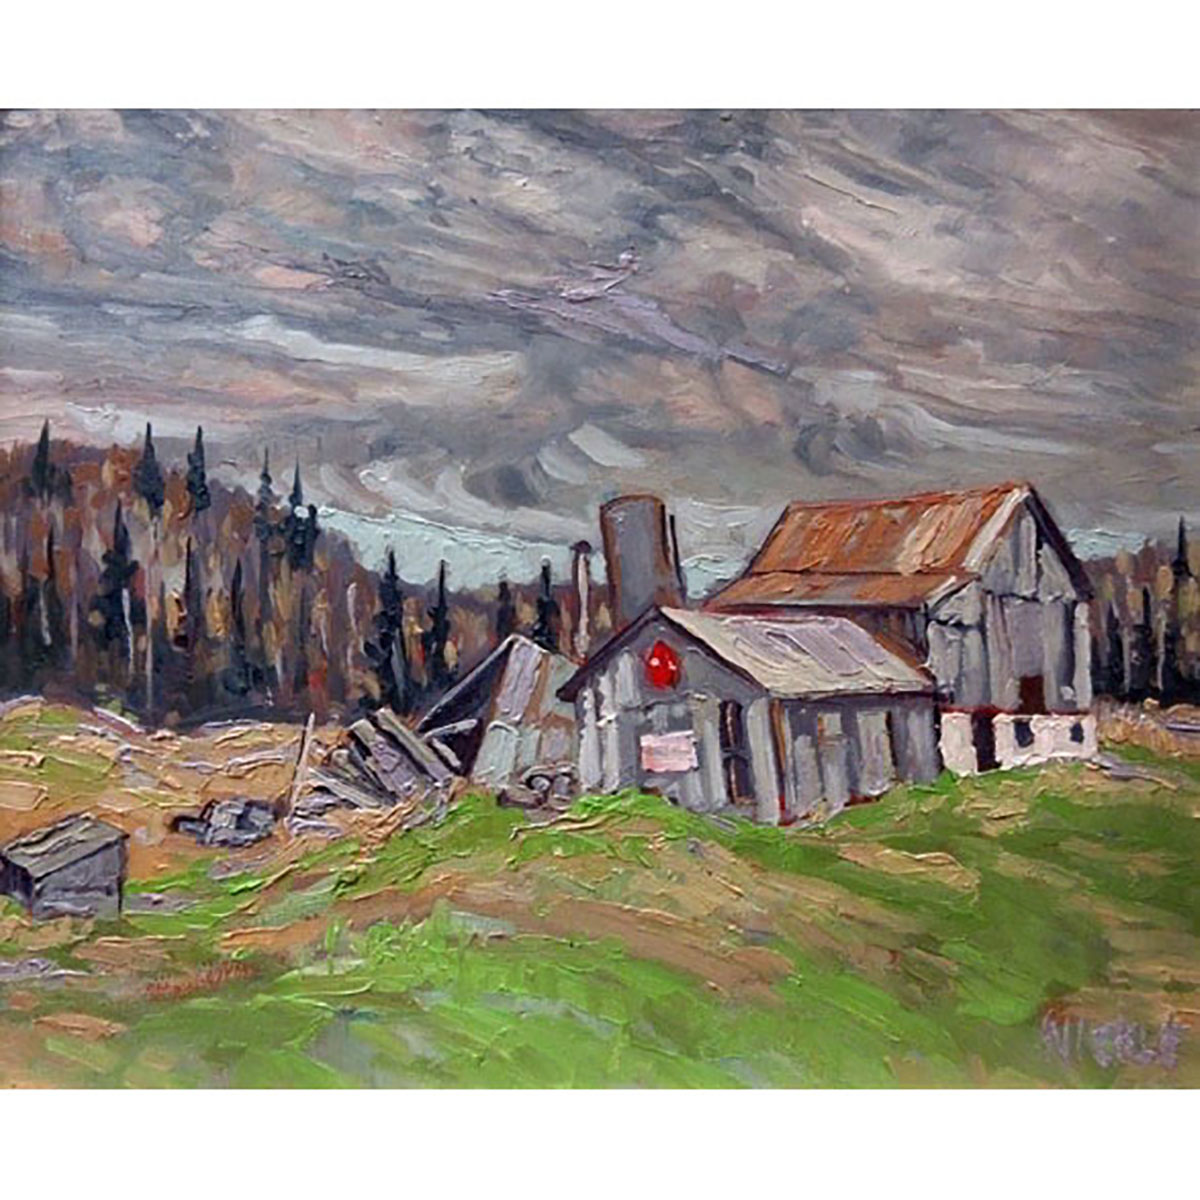 LAWRENCE NICKLE (CANADIAN, 1931-2014)